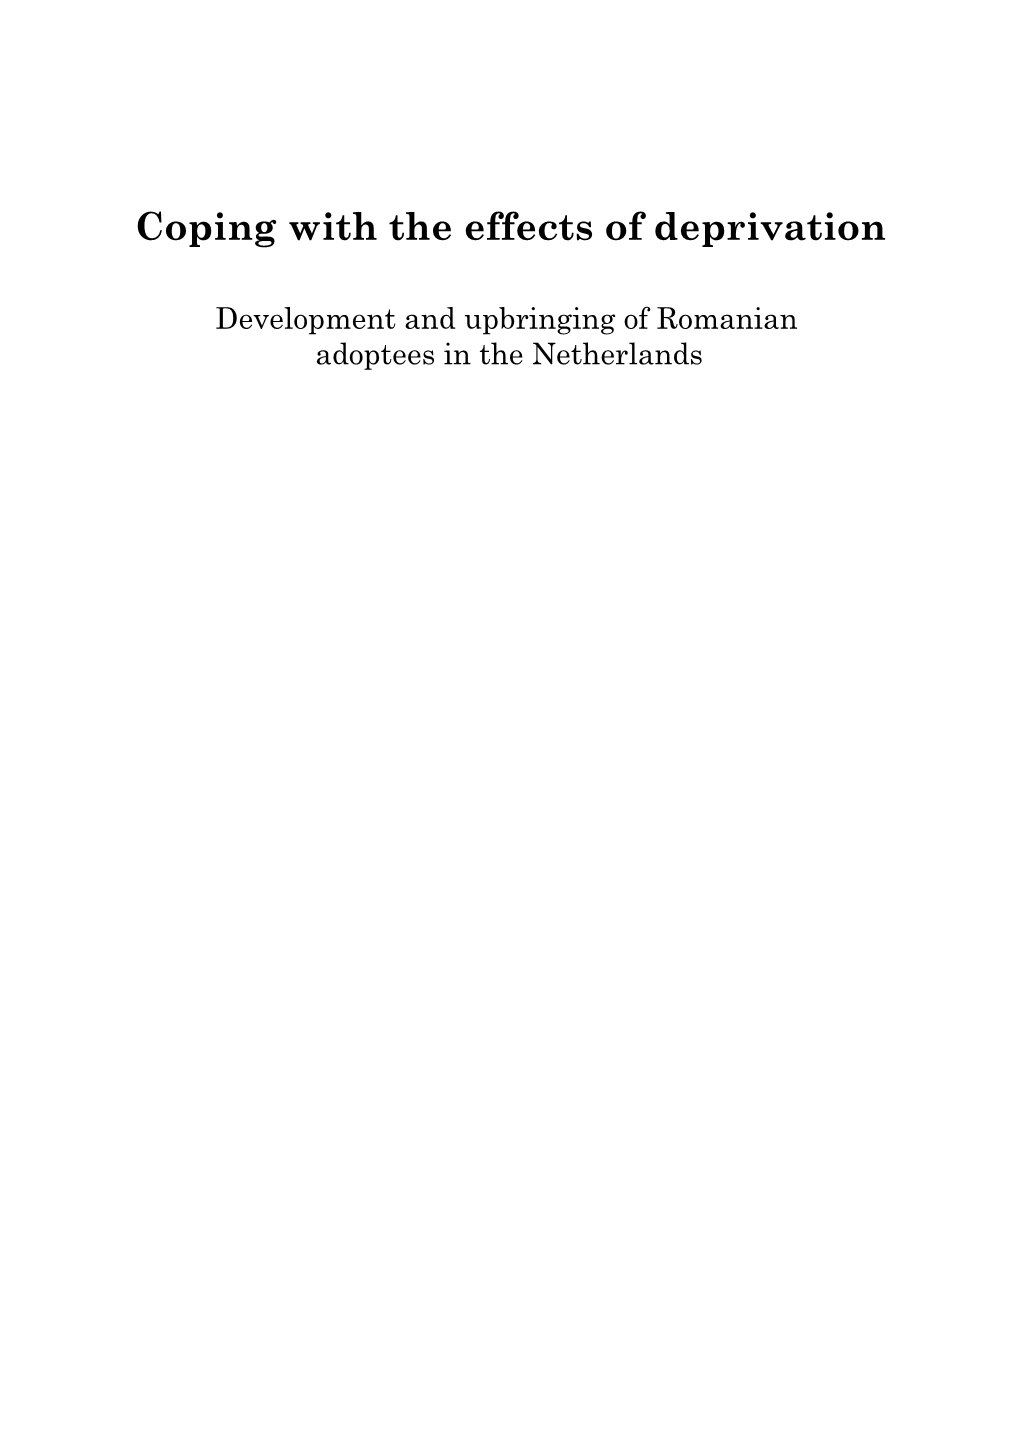 Coping with the Effects of Deprivation